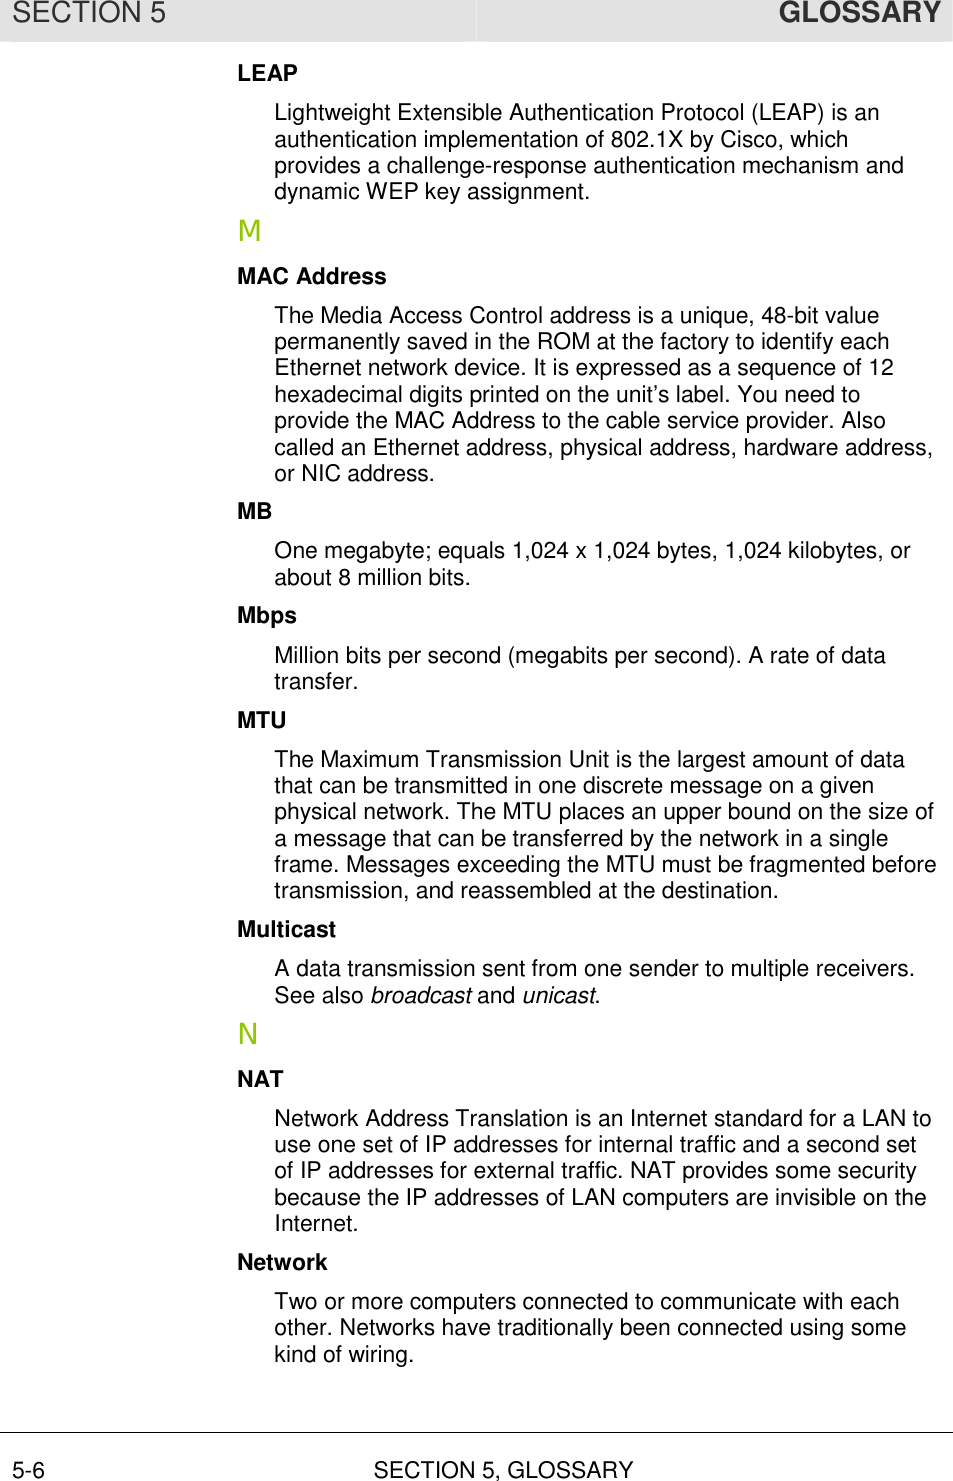 SECTION 5  GLOSSARY 5-6 SECTION 5, GLOSSARY  LEAP Lightweight Extensible Authentication Protocol (LEAP) is an authentication implementation of 802.1X by Cisco, which provides a challenge-response authentication mechanism and dynamic WEP key assignment. M MAC Address The Media Access Control address is a unique, 48-bit value permanently saved in the ROM at the factory to identify each Ethernet network device. It is expressed as a sequence of 12 hexadecimal digits printed on the unit’s label. You need to provide the MAC Address to the cable service provider. Also called an Ethernet address, physical address, hardware address, or NIC address. MB One megabyte; equals 1,024 x 1,024 bytes, 1,024 kilobytes, or about 8 million bits. Mbps Million bits per second (megabits per second). A rate of data transfer. MTU The Maximum Transmission Unit is the largest amount of data that can be transmitted in one discrete message on a given physical network. The MTU places an upper bound on the size of a message that can be transferred by the network in a single frame. Messages exceeding the MTU must be fragmented before transmission, and reassembled at the destination. Multicast A data transmission sent from one sender to multiple receivers. See also broadcast and unicast. N NAT Network Address Translation is an Internet standard for a LAN to use one set of IP addresses for internal traffic and a second set of IP addresses for external traffic. NAT provides some security because the IP addresses of LAN computers are invisible on the Internet. Network Two or more computers connected to communicate with each other. Networks have traditionally been connected using some kind of wiring. 